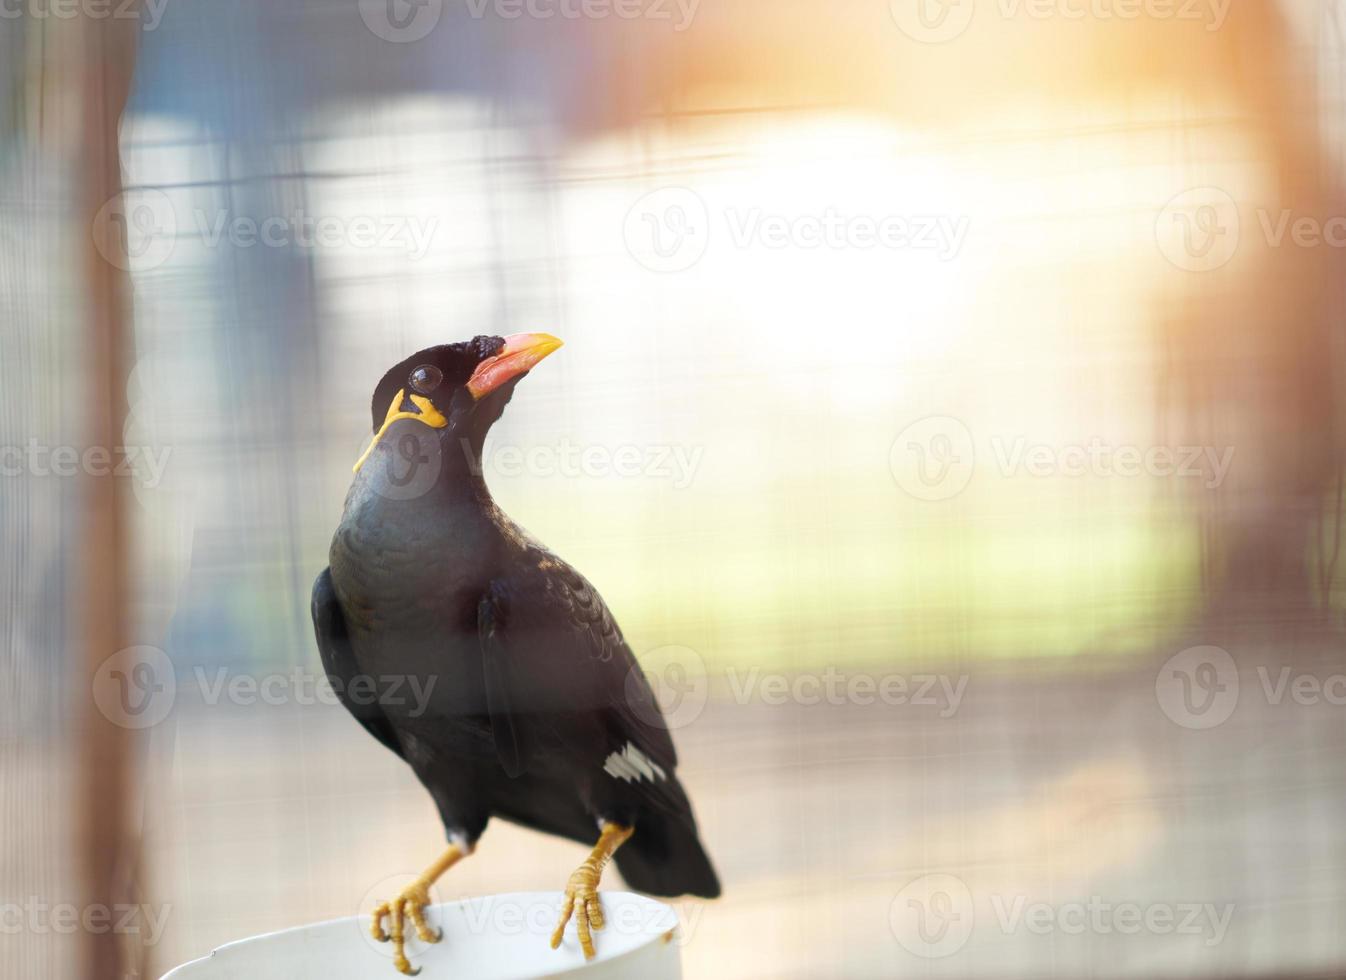 hill myna or black bird in cage net  foreground in detain or imprison life concept photo